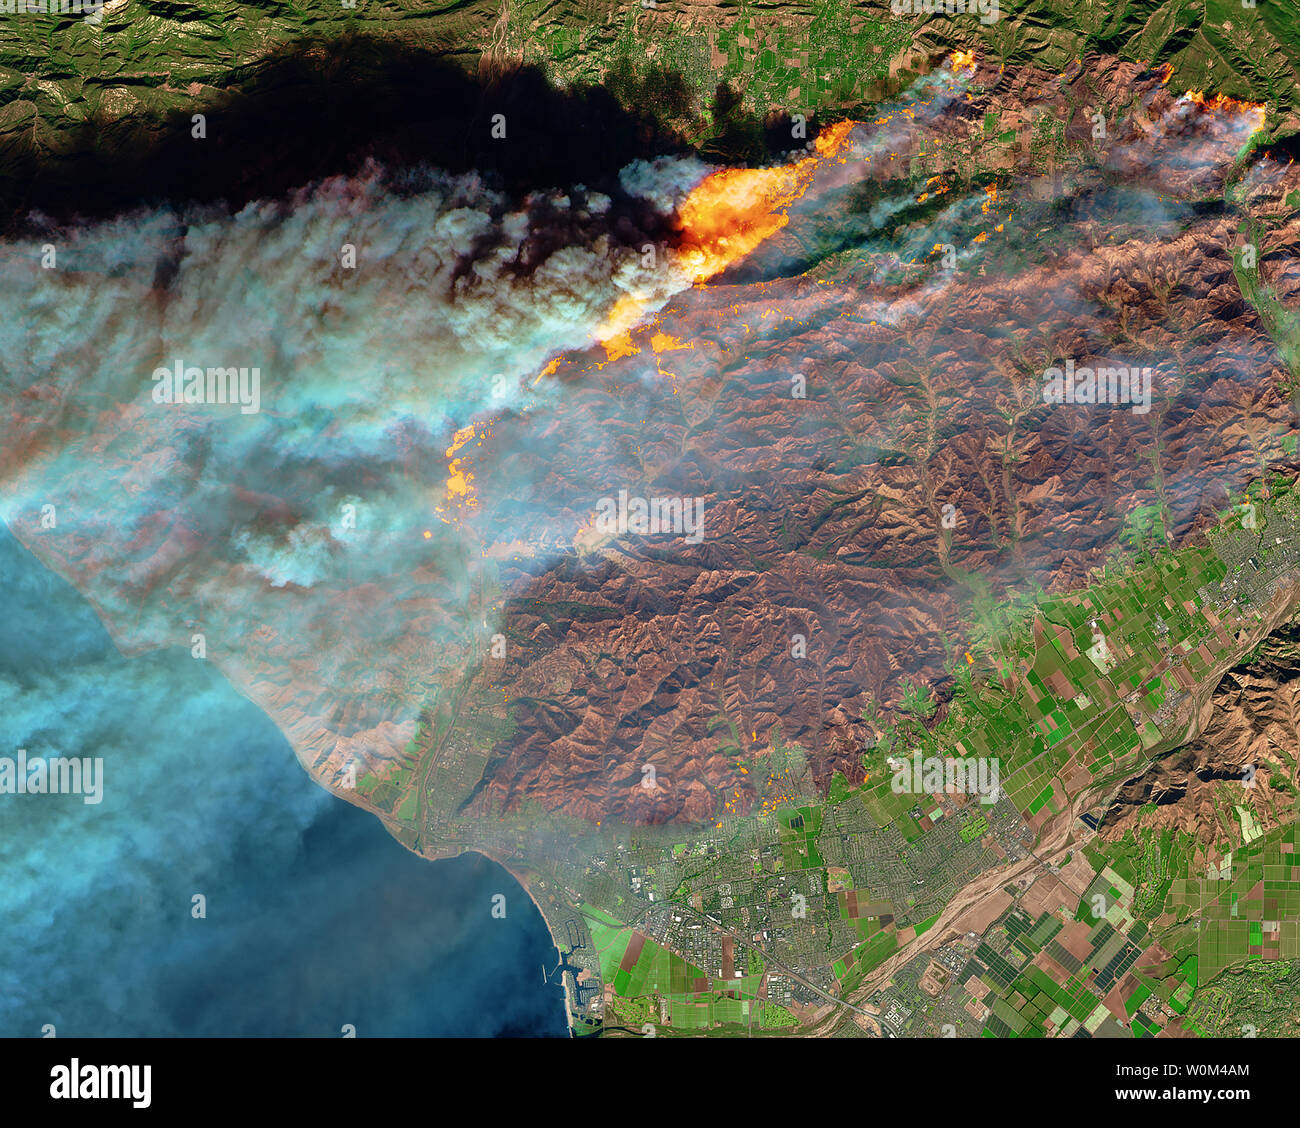 On December 5, 2017, the Multi-Spectral Imager (MSI) on the European Space Agency's Sentinel-2 satellite captured the data for a false-color image of the burn scar in Ventura County, California. Active fires appear orange; the burn scar is brown. Unburned vegetation is green; developed areas are gray. The Sentinel-2 image is based on observations of visible, shortwave infrared, and near-infrared light. The fires mainly affected a forested, hilly area north of Ventura, but flames have encroached into the northern edge of the city. On December 6, 2017, Cal Fire estimated that at least 12,000 str Stock Photo